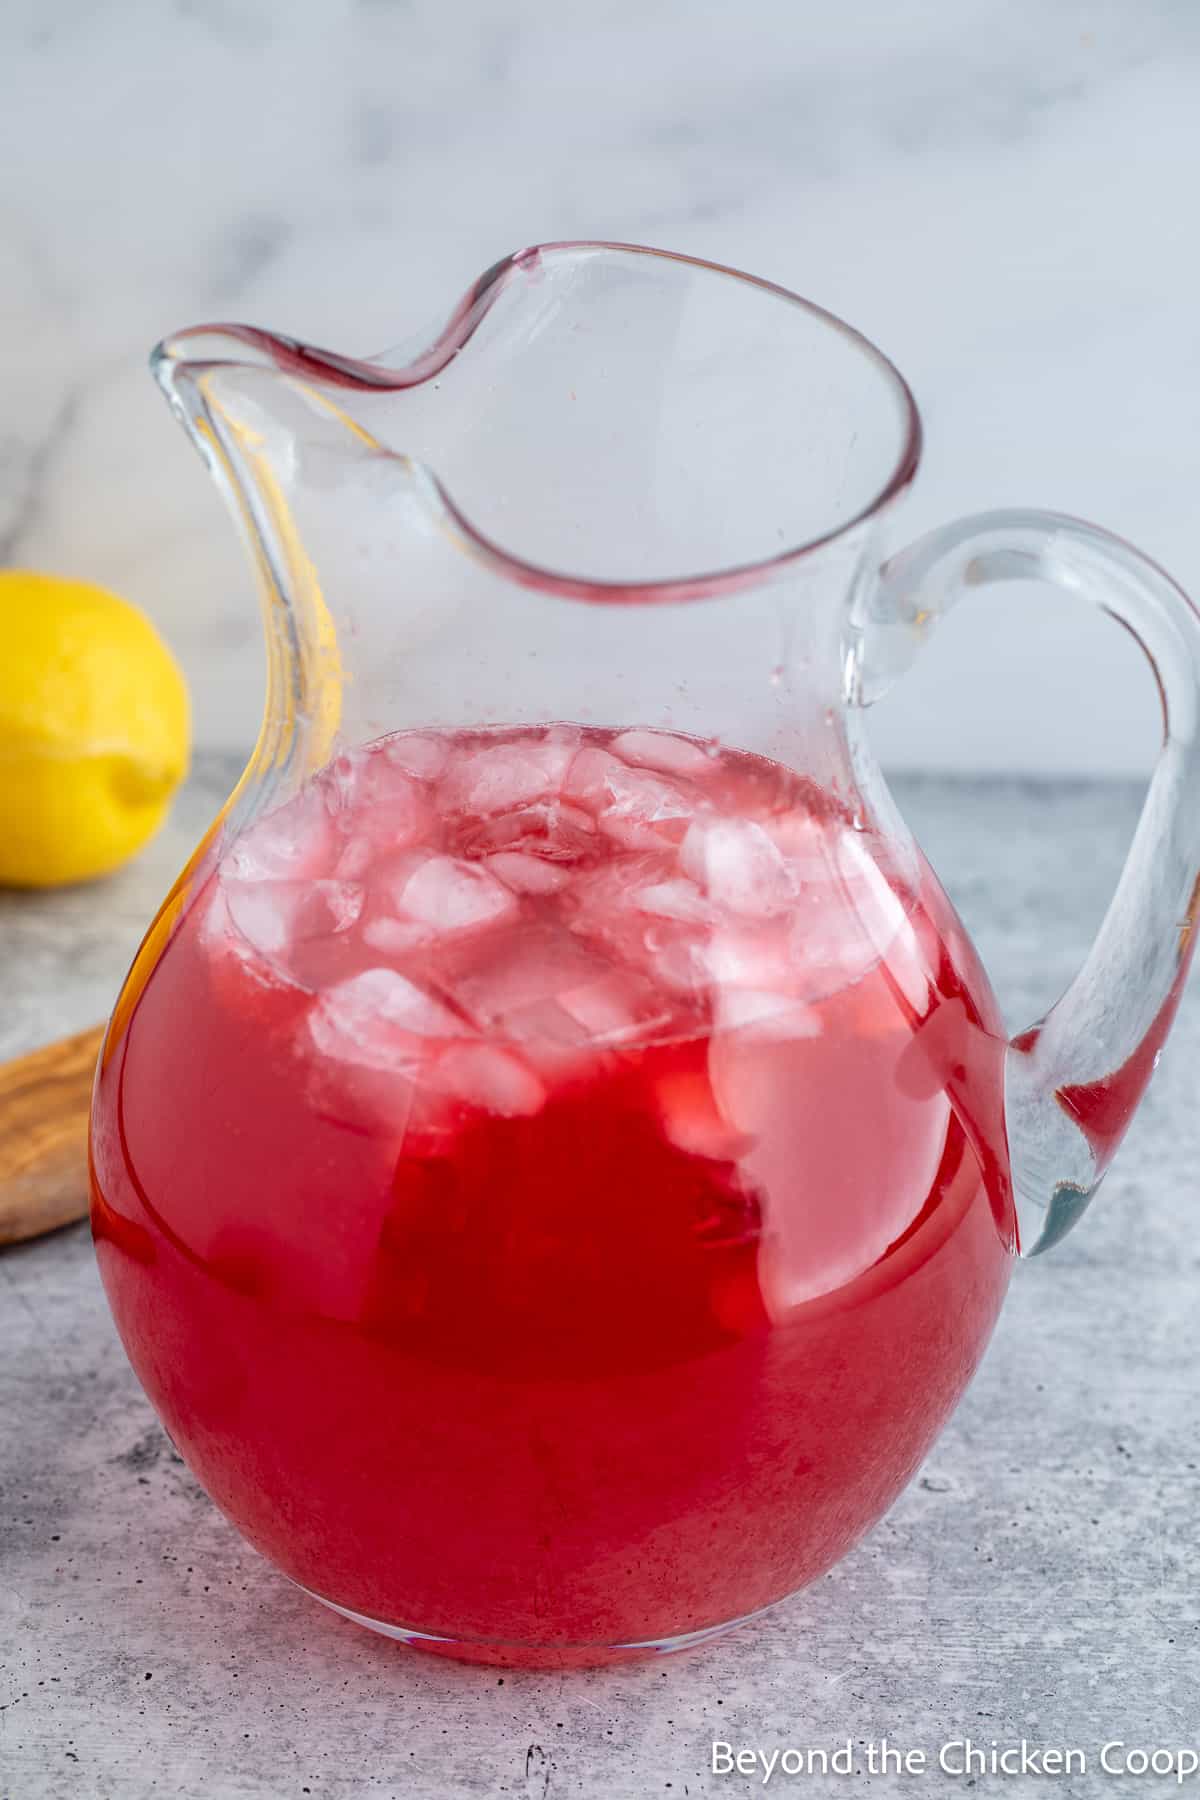 A red lemonade in a glass pitcher.